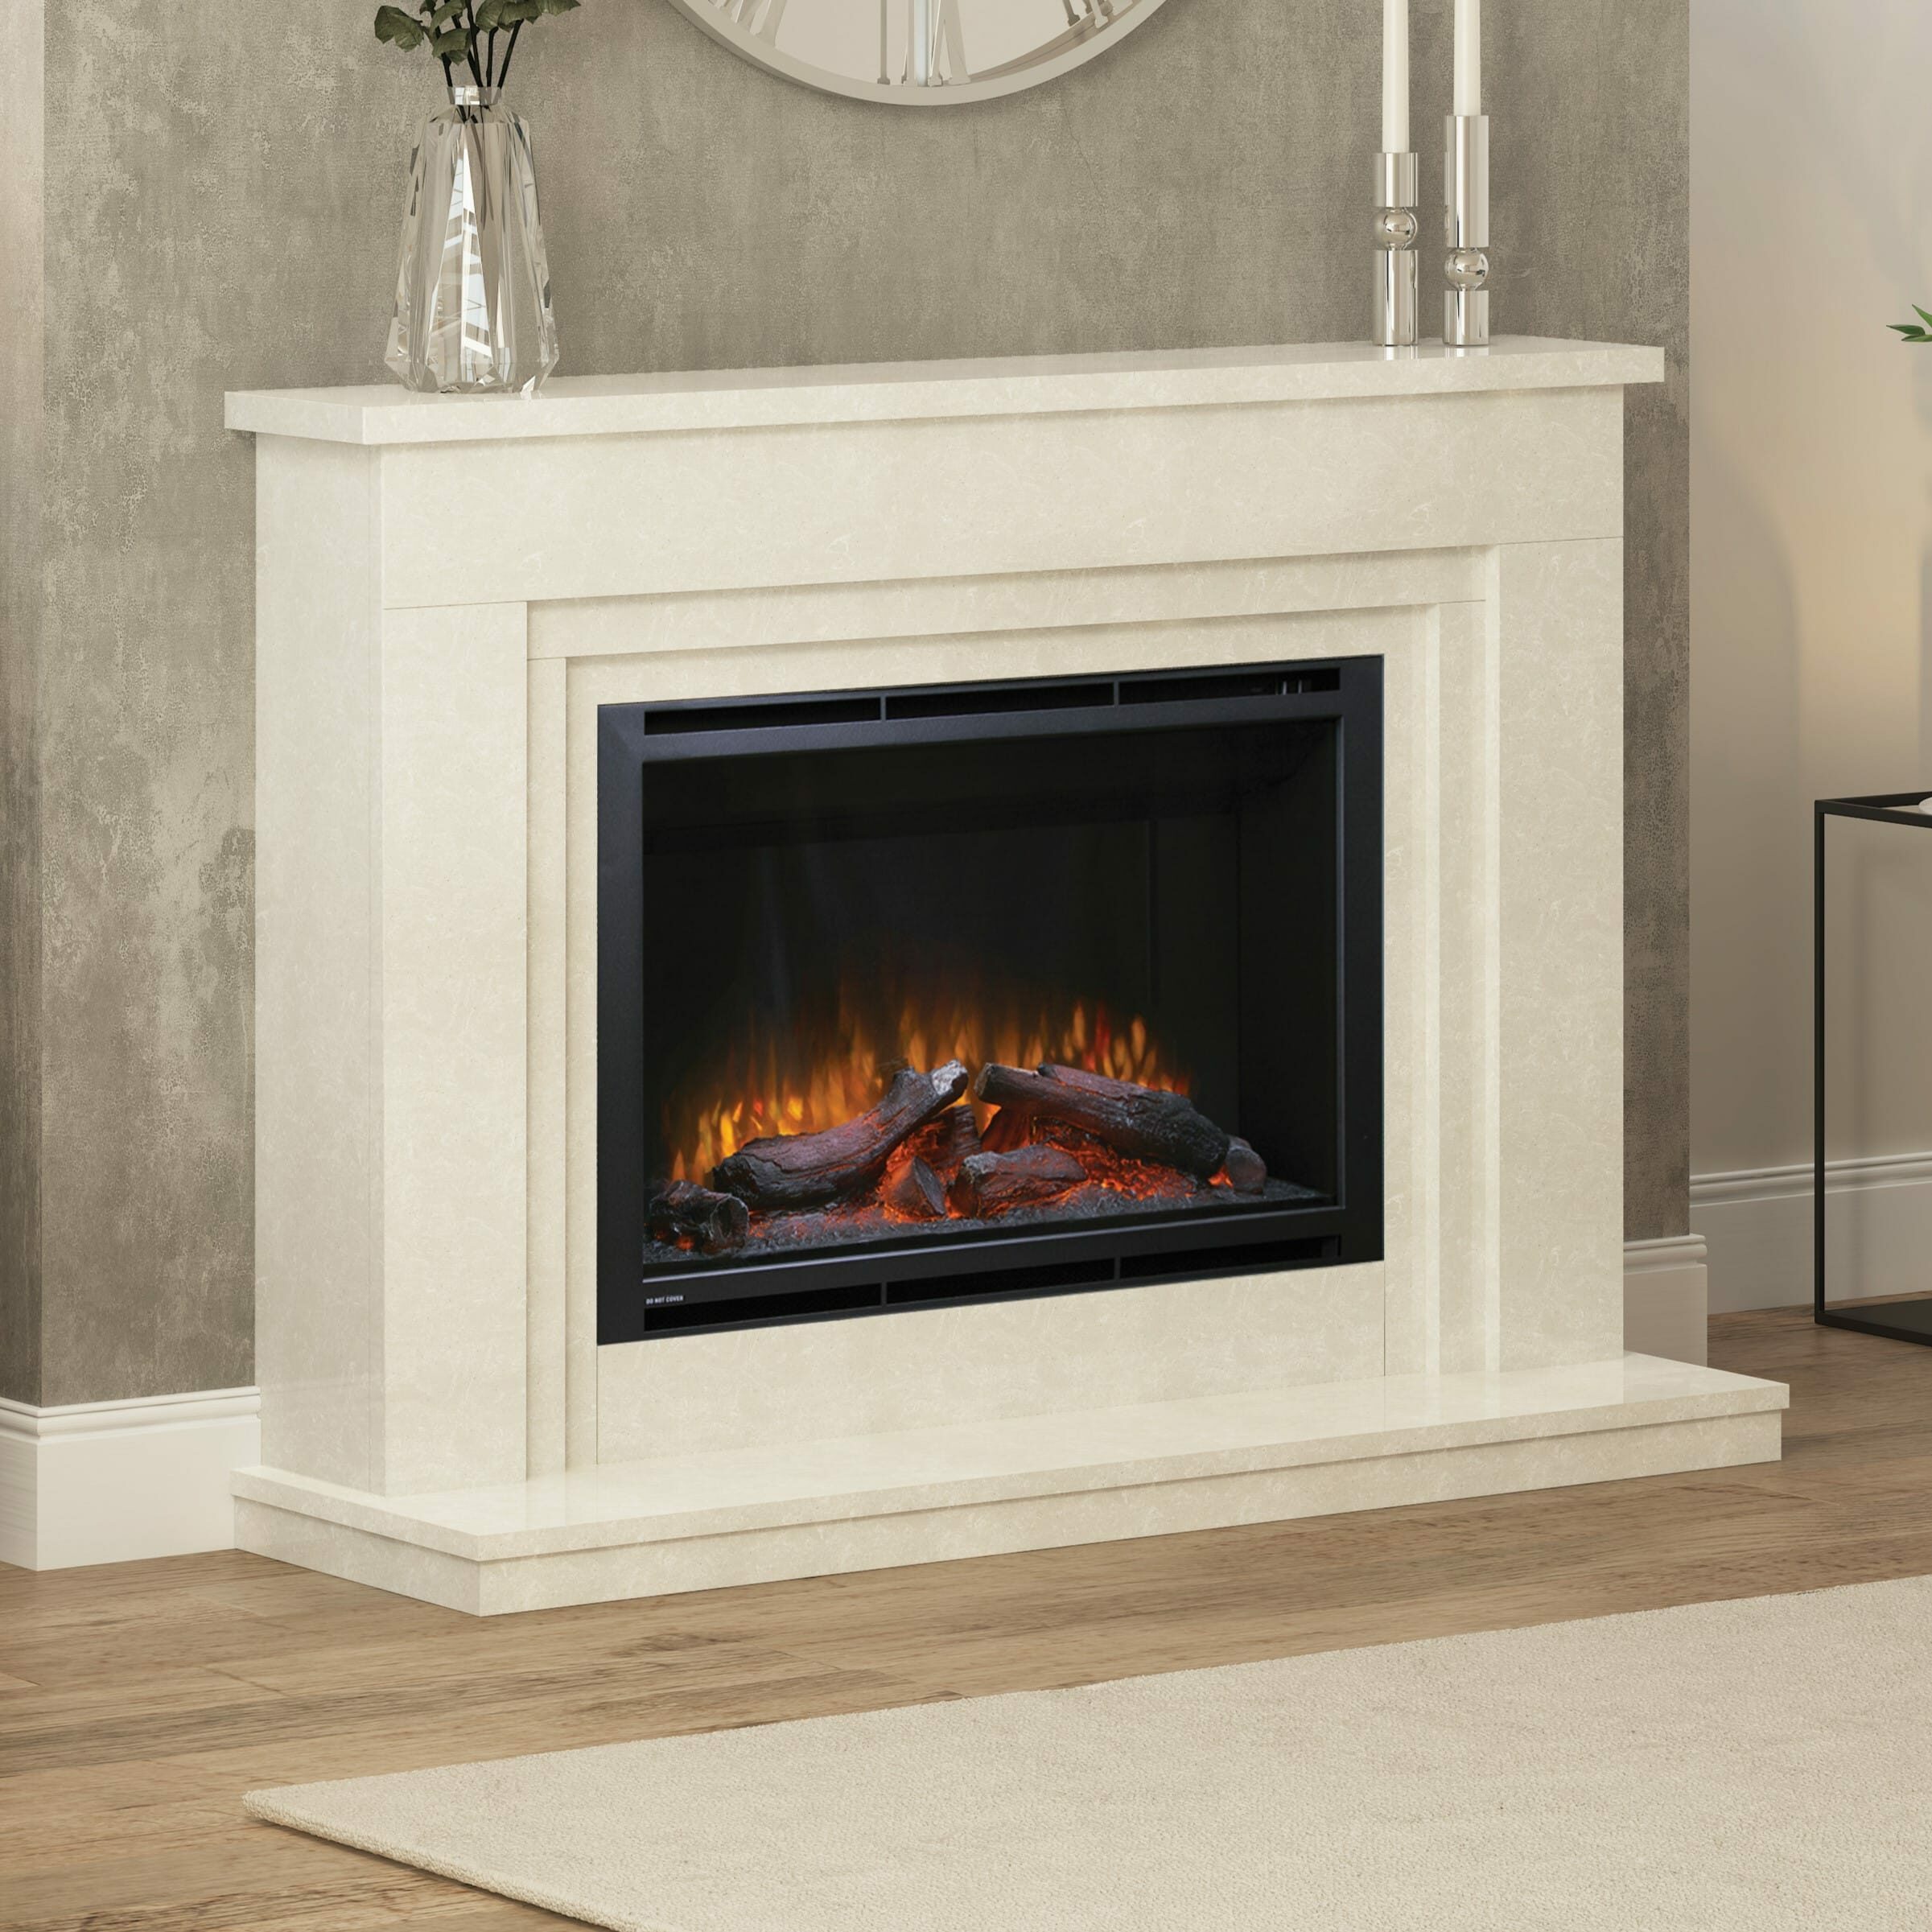 Adderstone in White Micromarble with Foxglen 950 Electric Fire